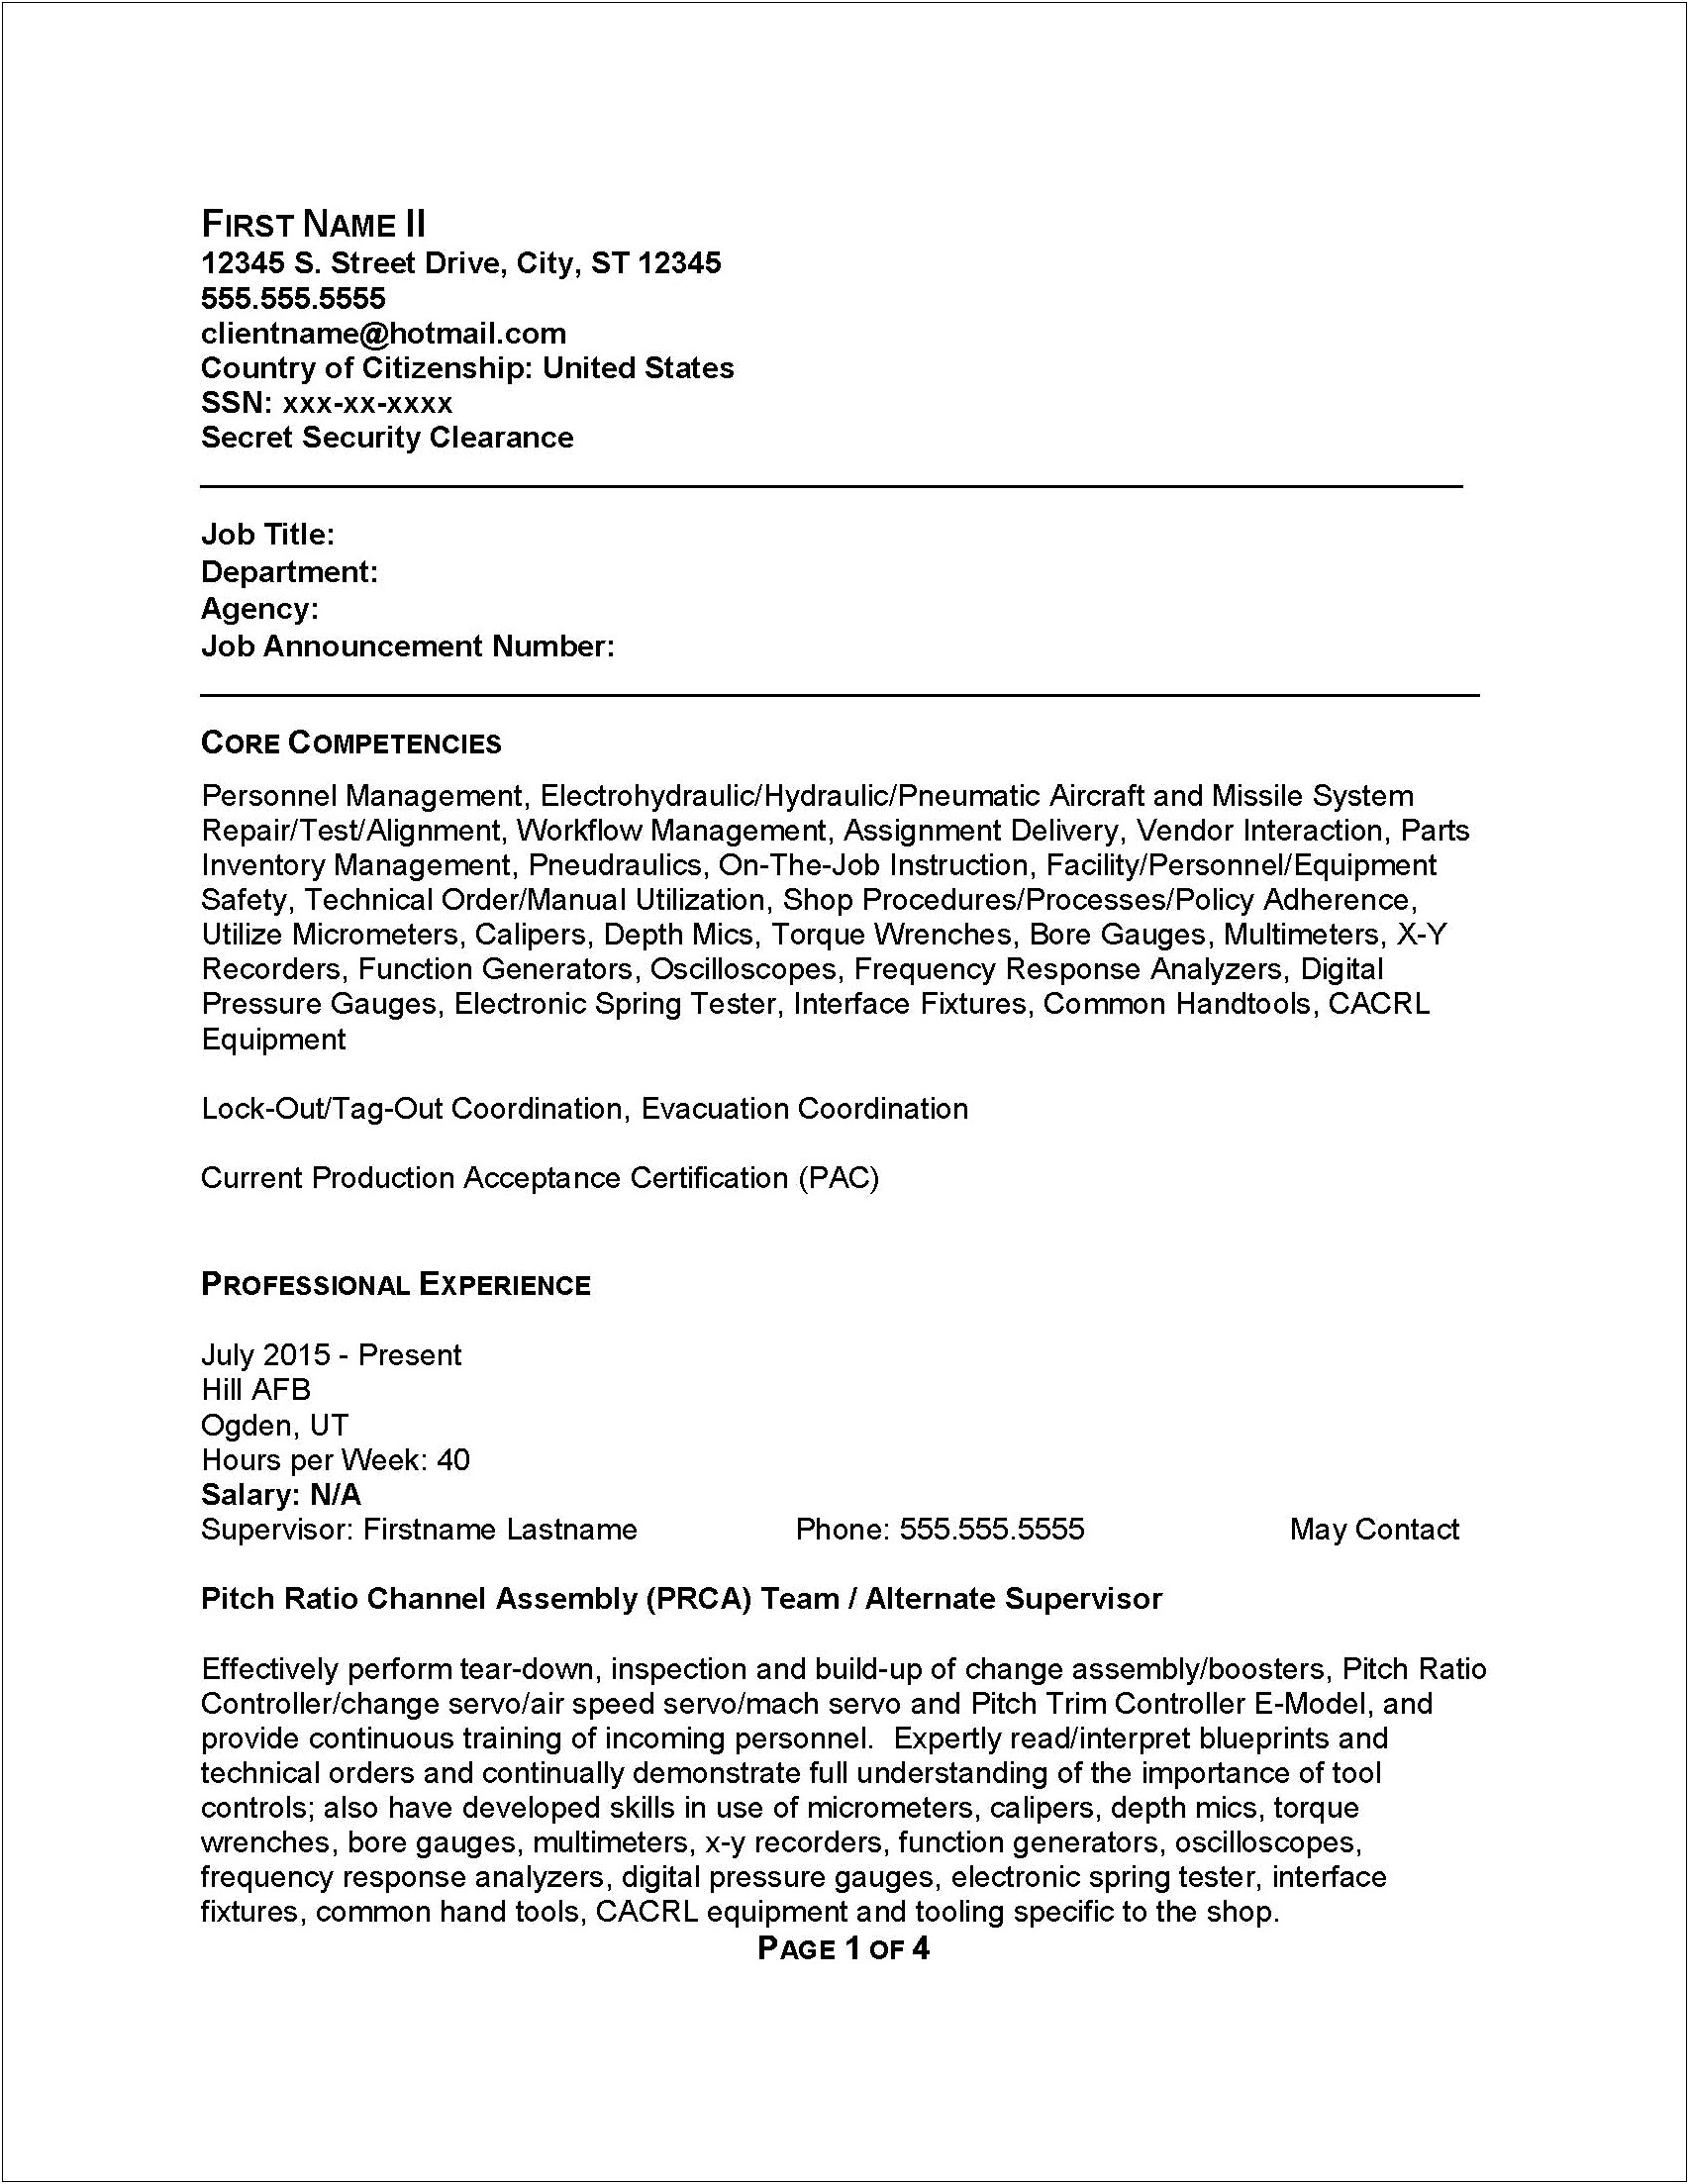 Targeted Resume For Federal Government Jobs Example